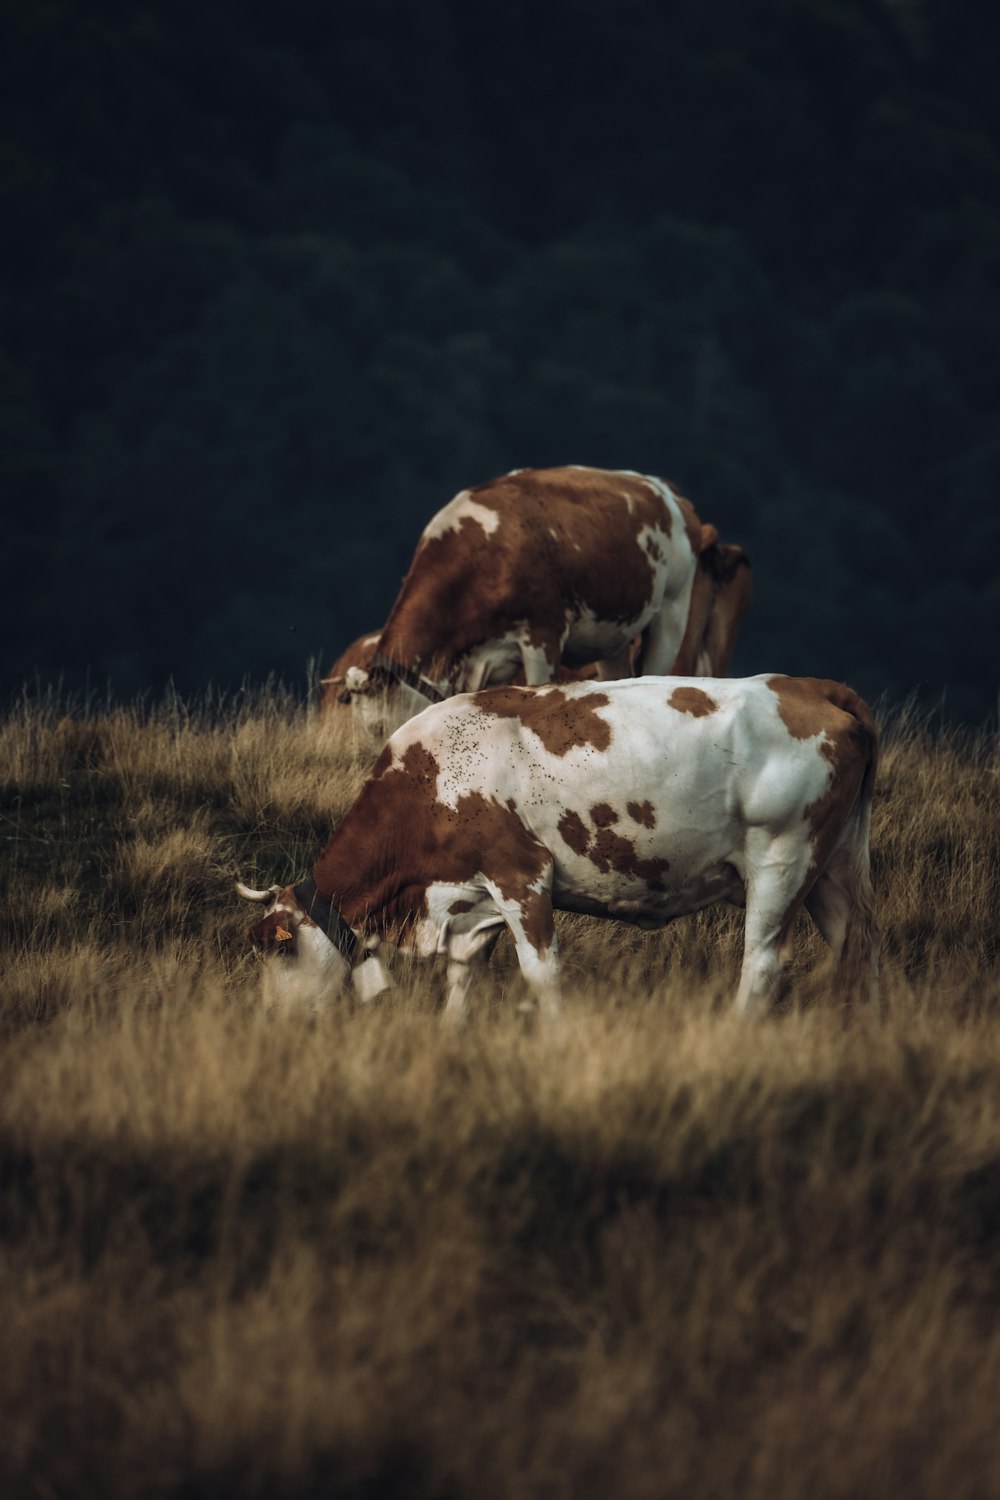 two brown and white cows grazing in a field